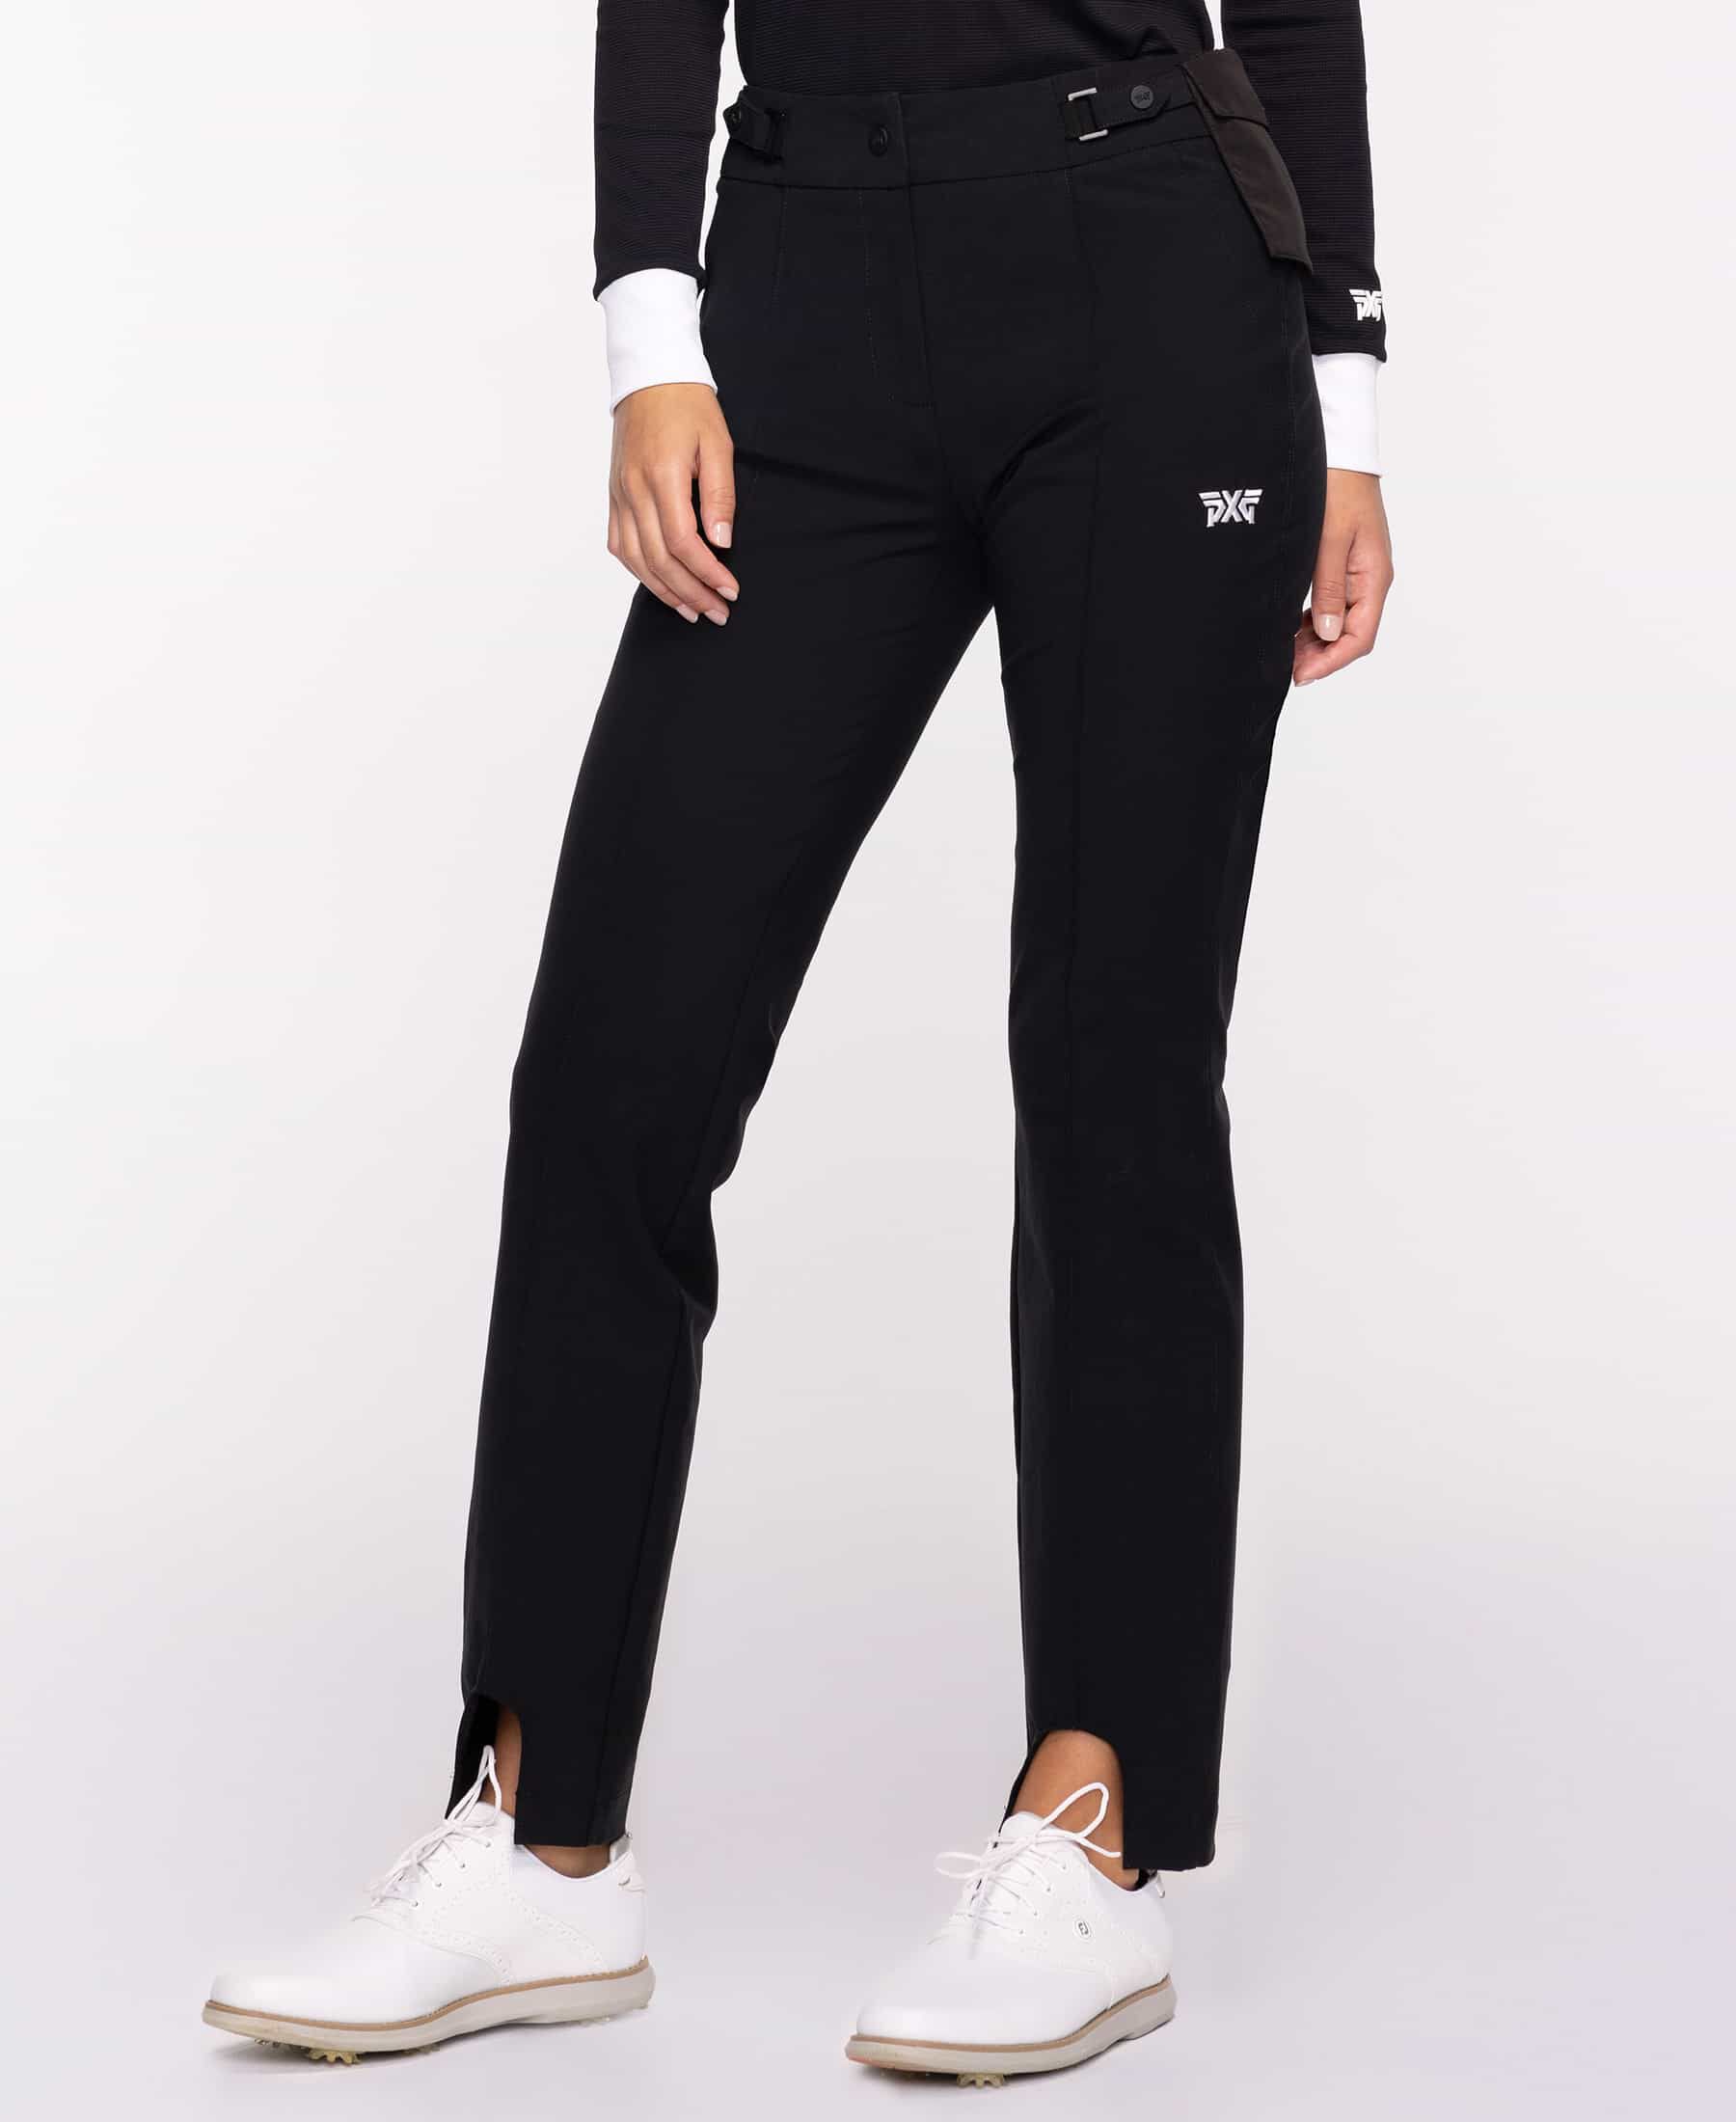 High-Low Ankle Golf Pant | Women's Golf Bottoms | Pants, Skirts